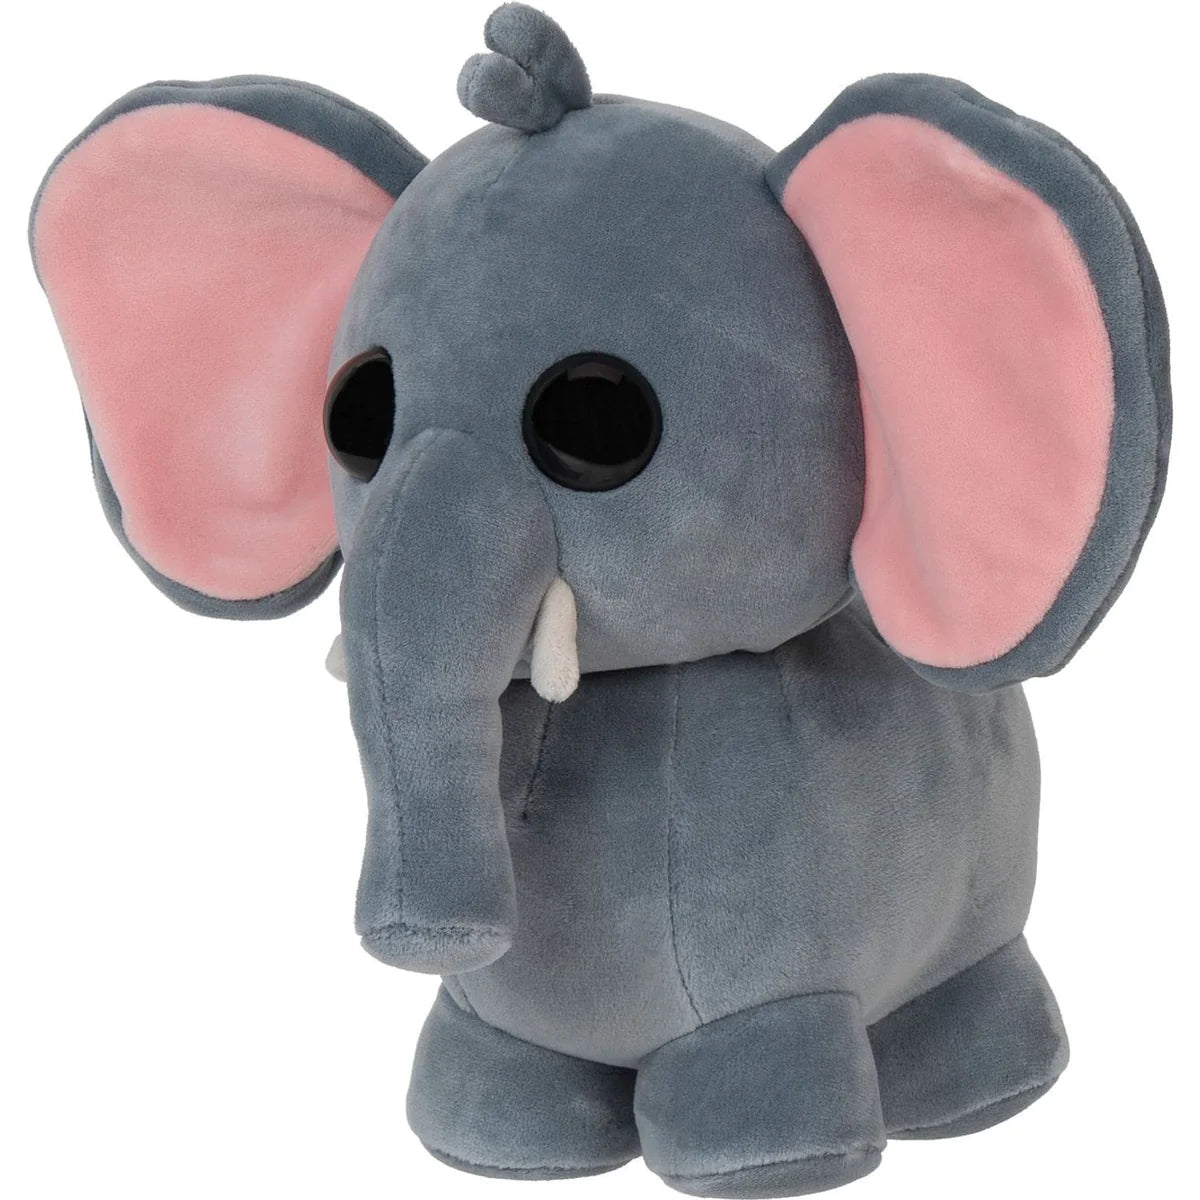 Adopt Me Series 2 Elephant 8 Inch Collector Plush Soft Toy